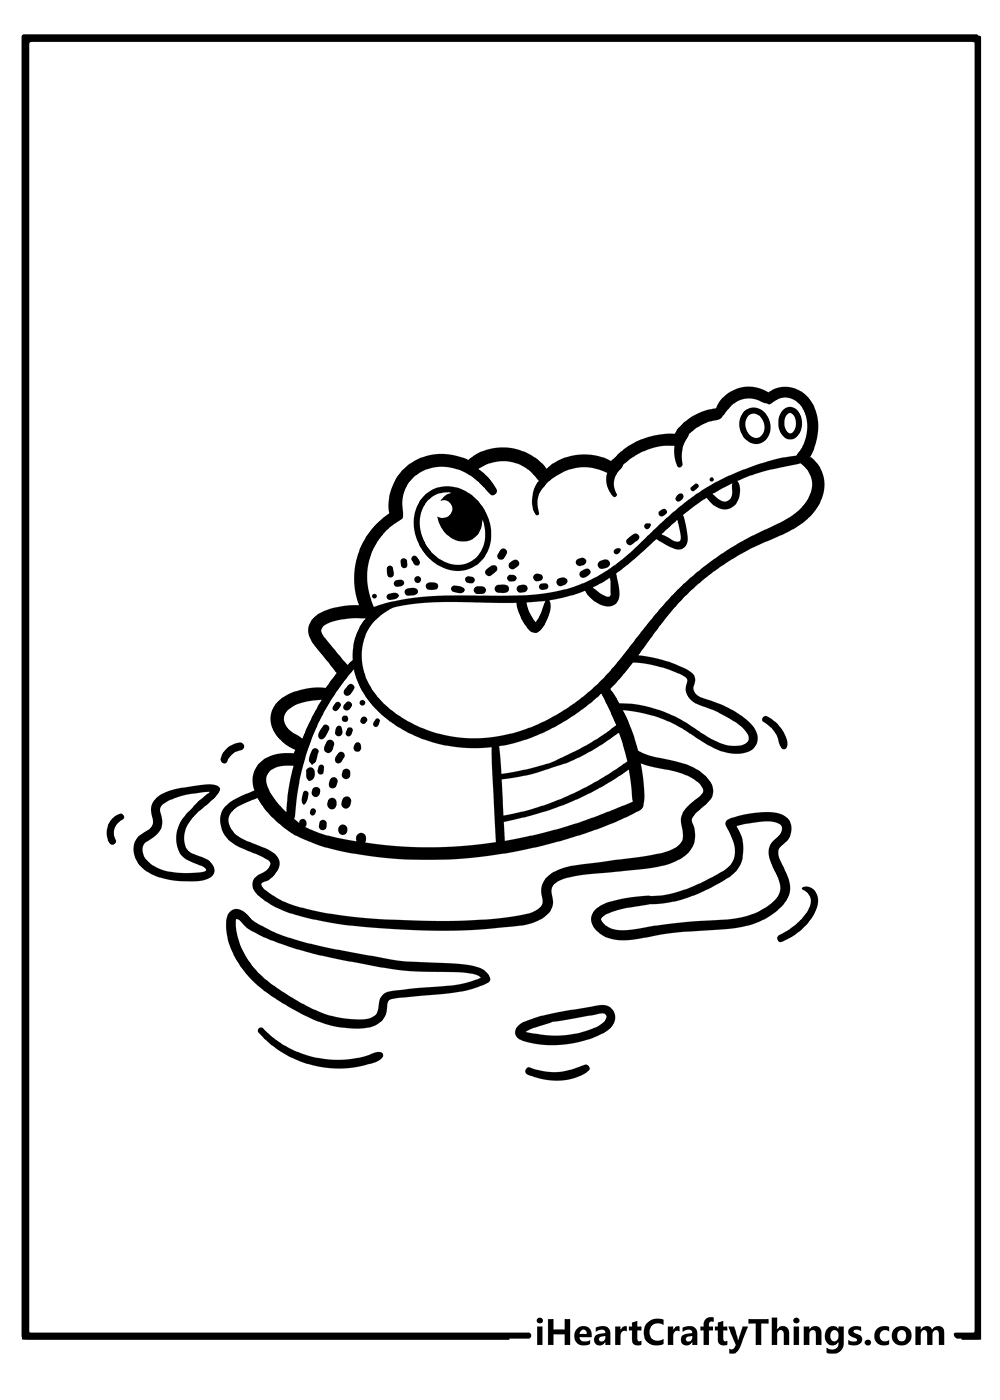 Crocodile Coloring Sheet for children free download